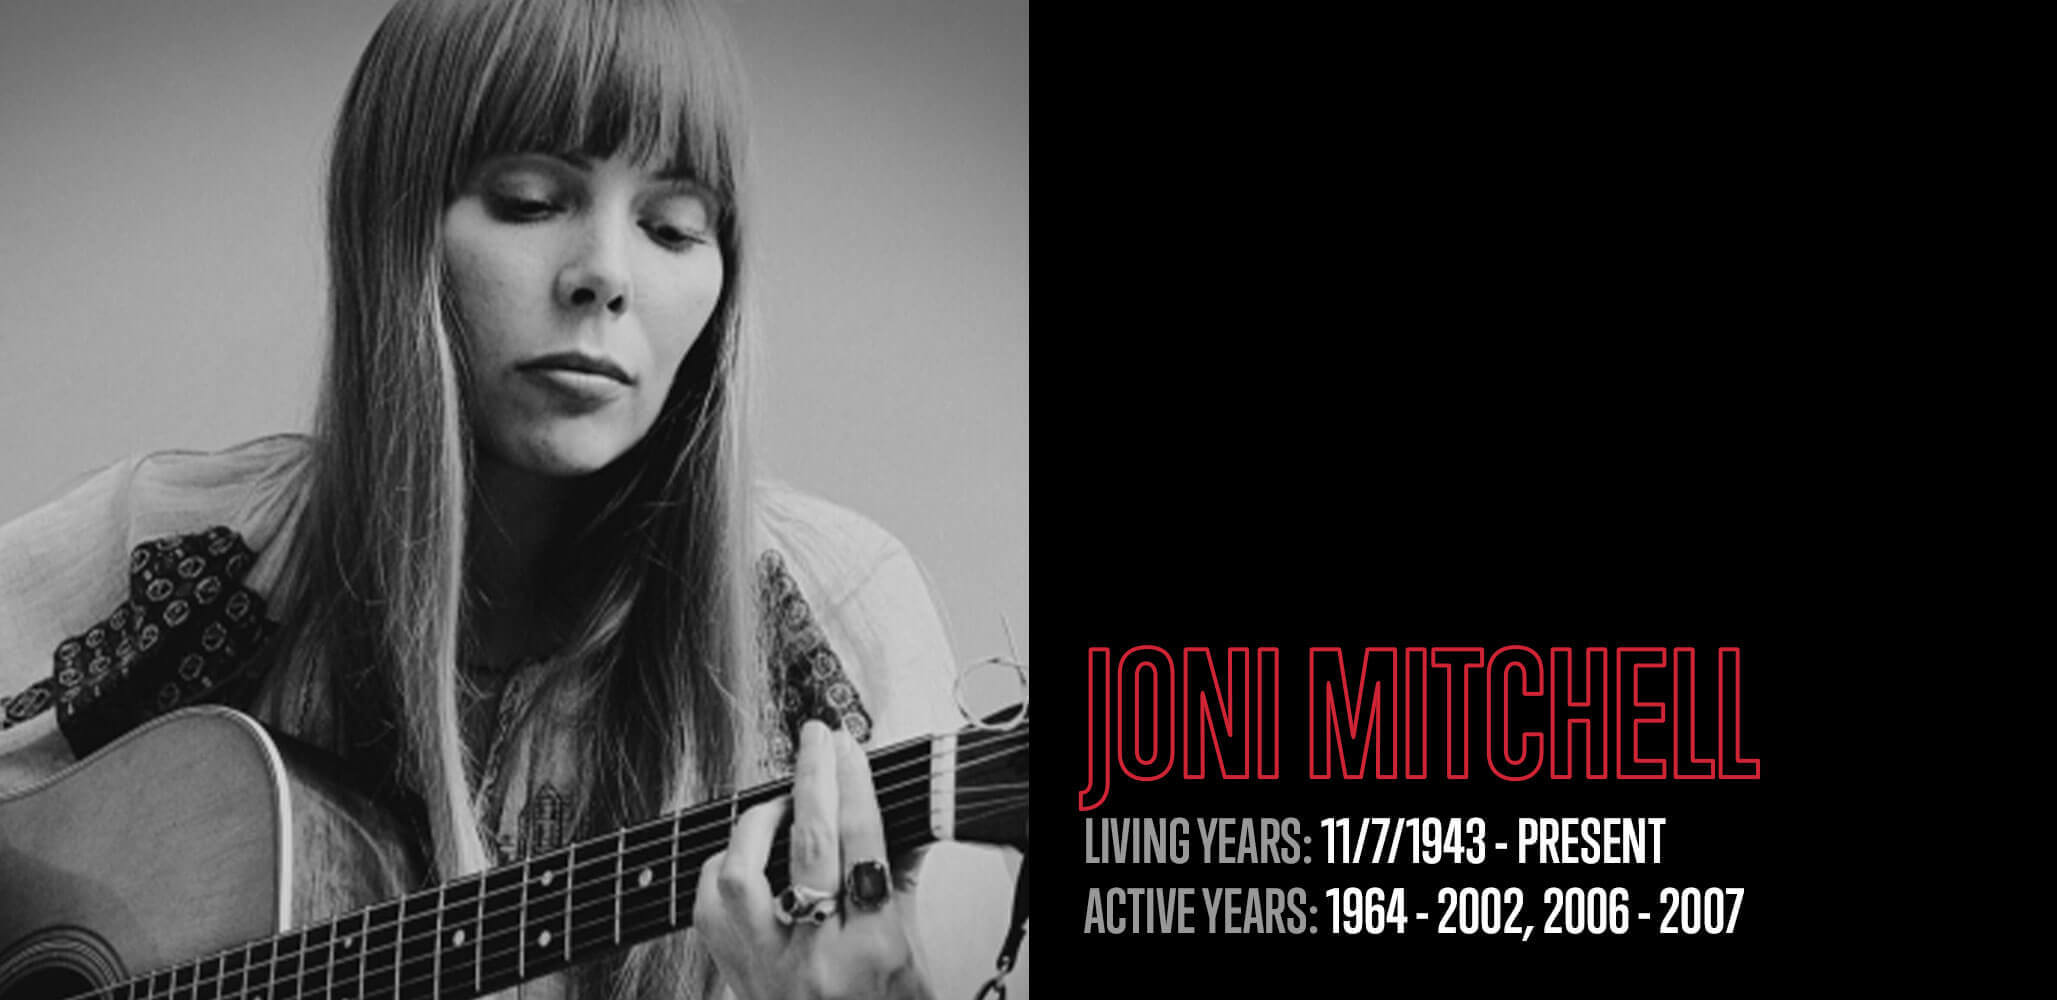 Female Guitarists You Should Know | Joni Mitchelle